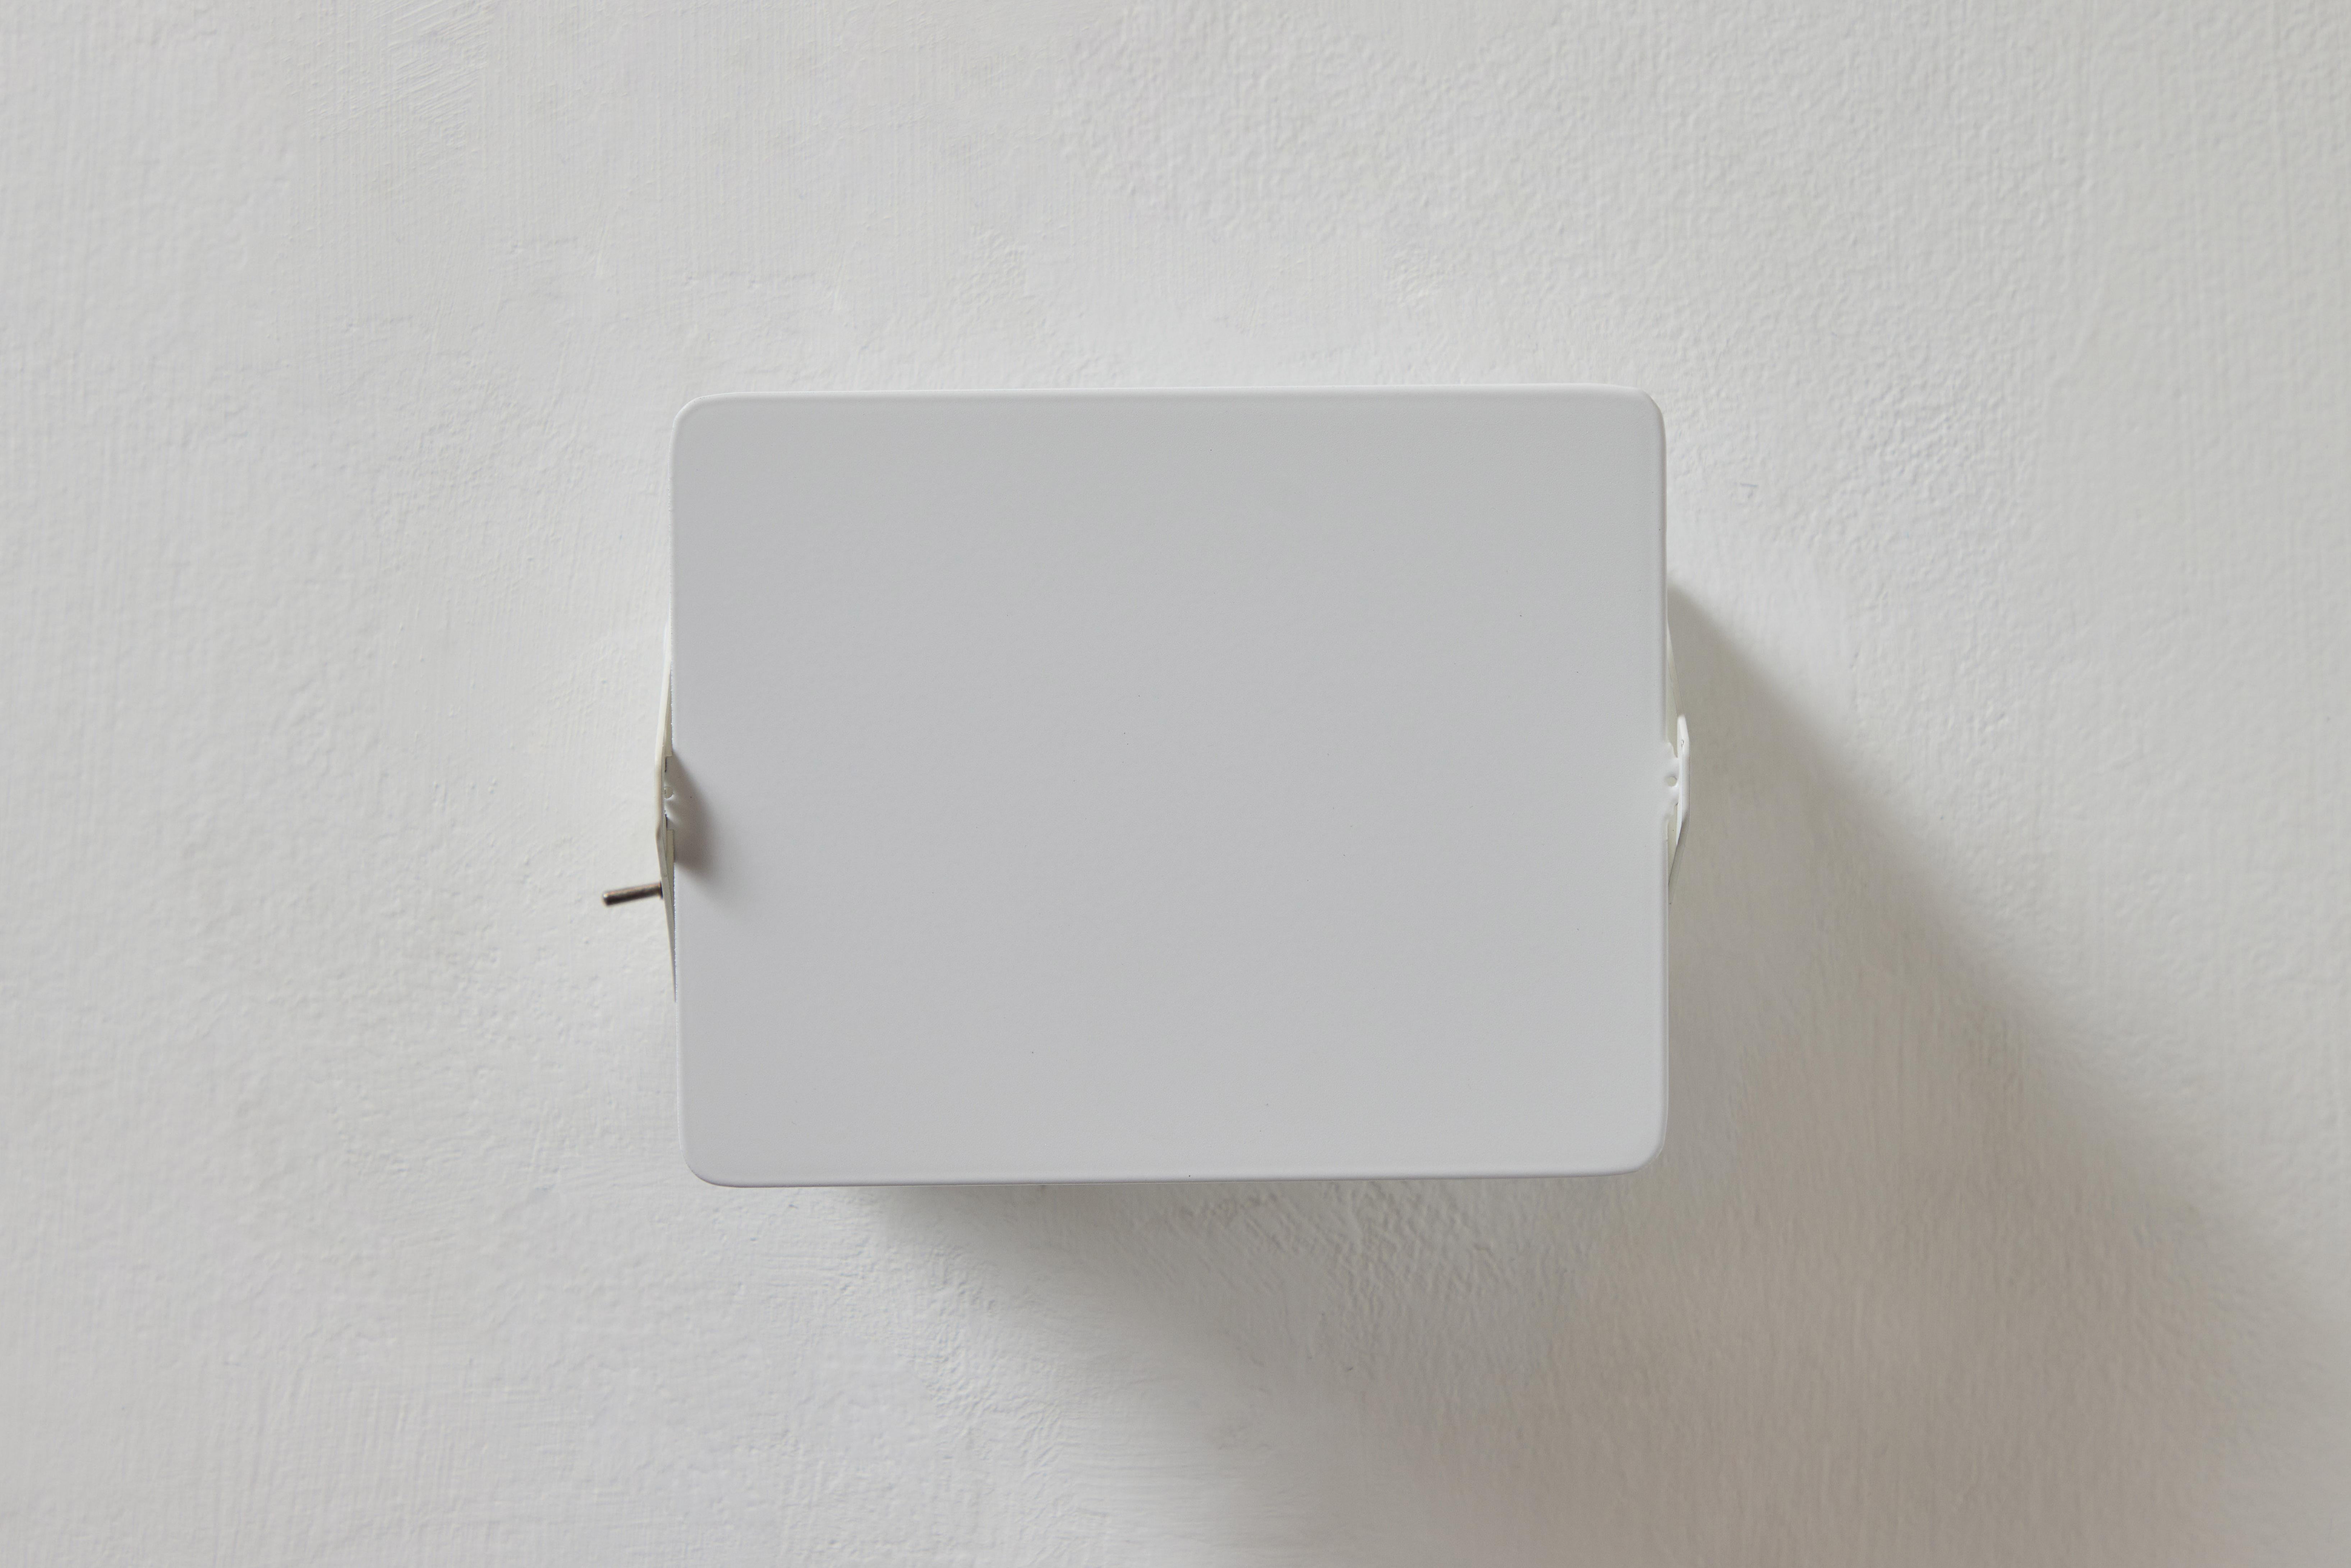 Charlotte Perriand 'Applique À Volet Pivotant' Wall Light in All White for Nemo For Sale 4